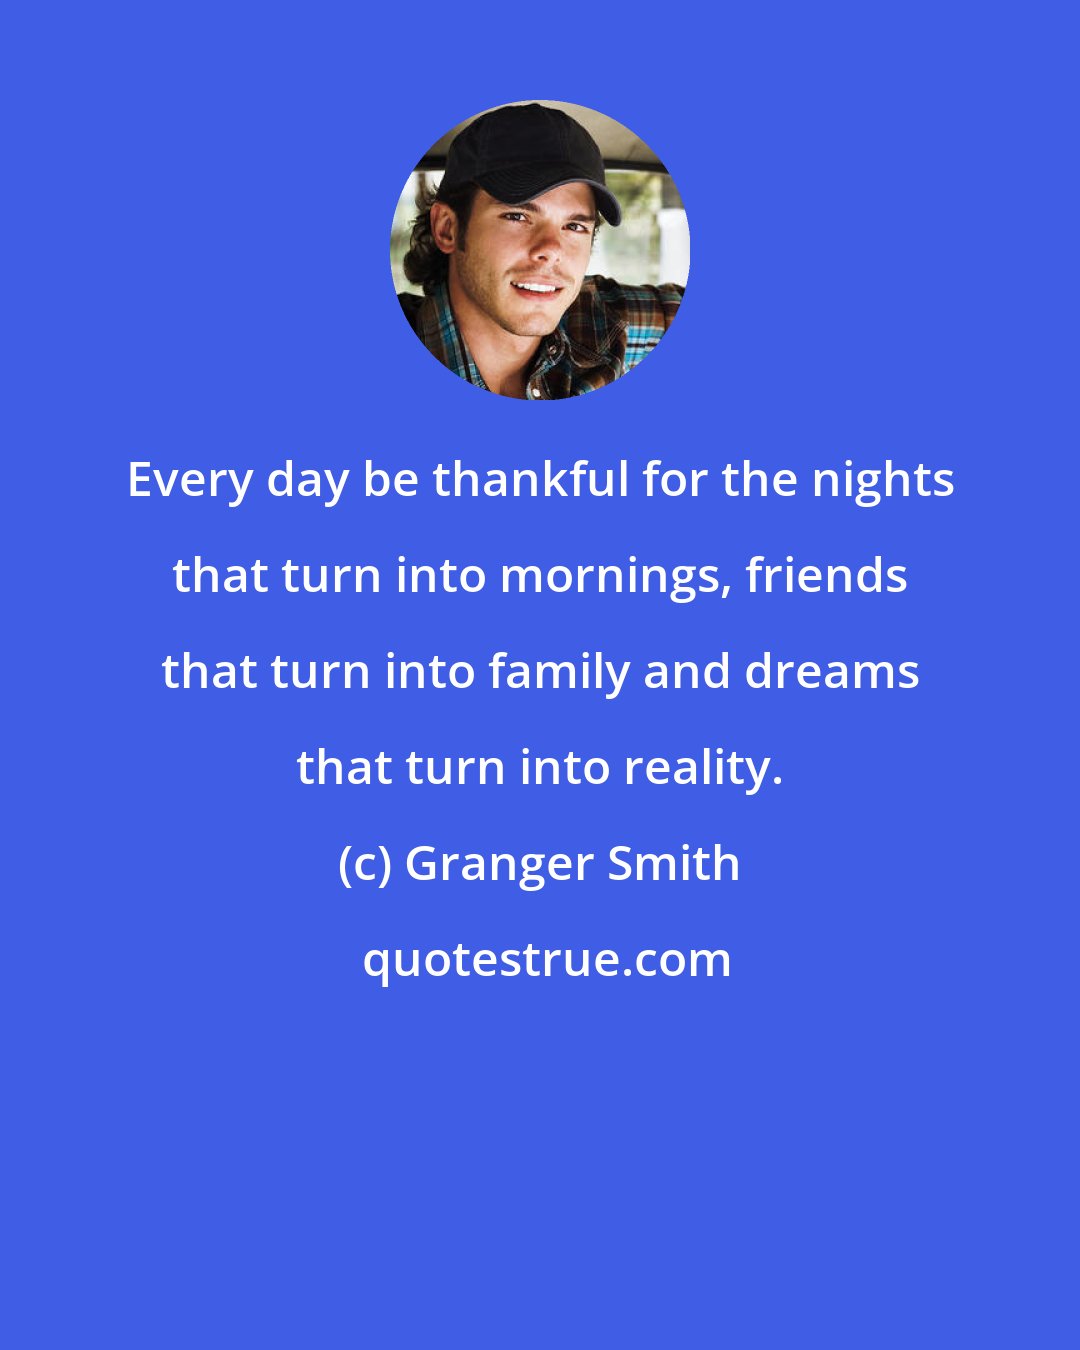 Granger Smith: Every day be thankful for the nights that turn into mornings, friends that turn into family and dreams that turn into reality.